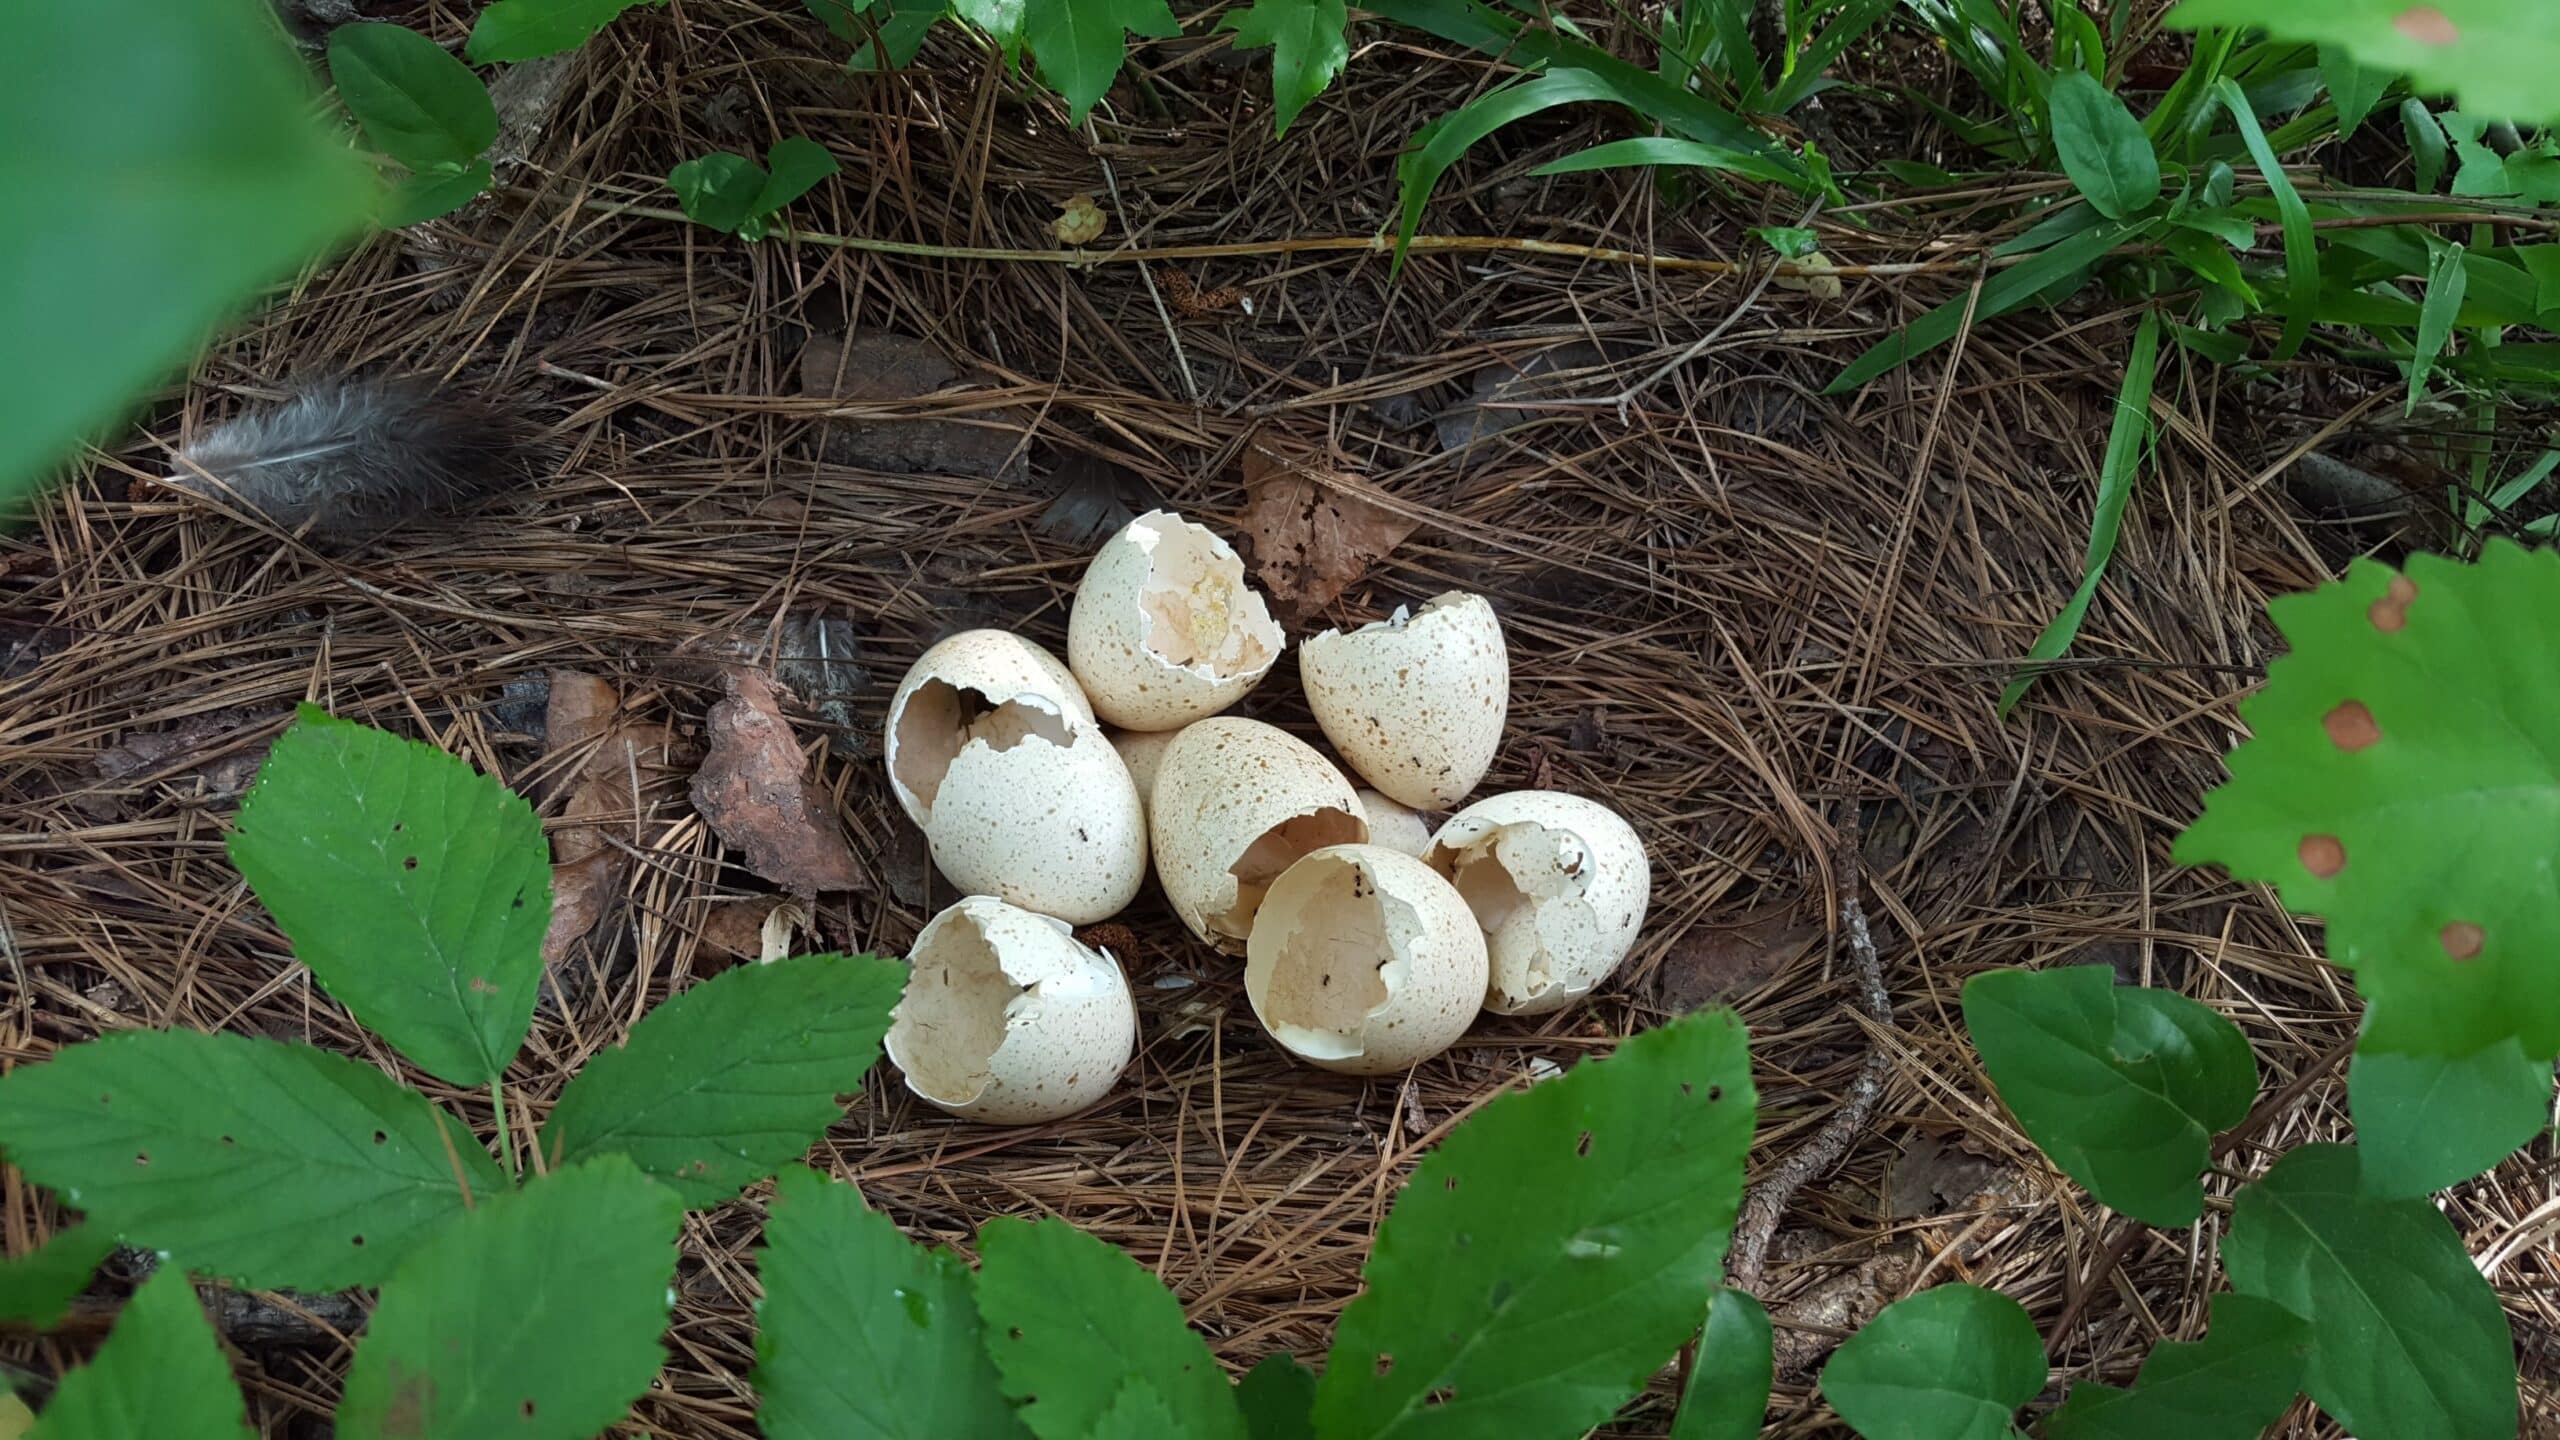 Hatched turkey eggs - Secrets of Wild Turkey Nesting Revealed - College of Natural Resources at NC State University